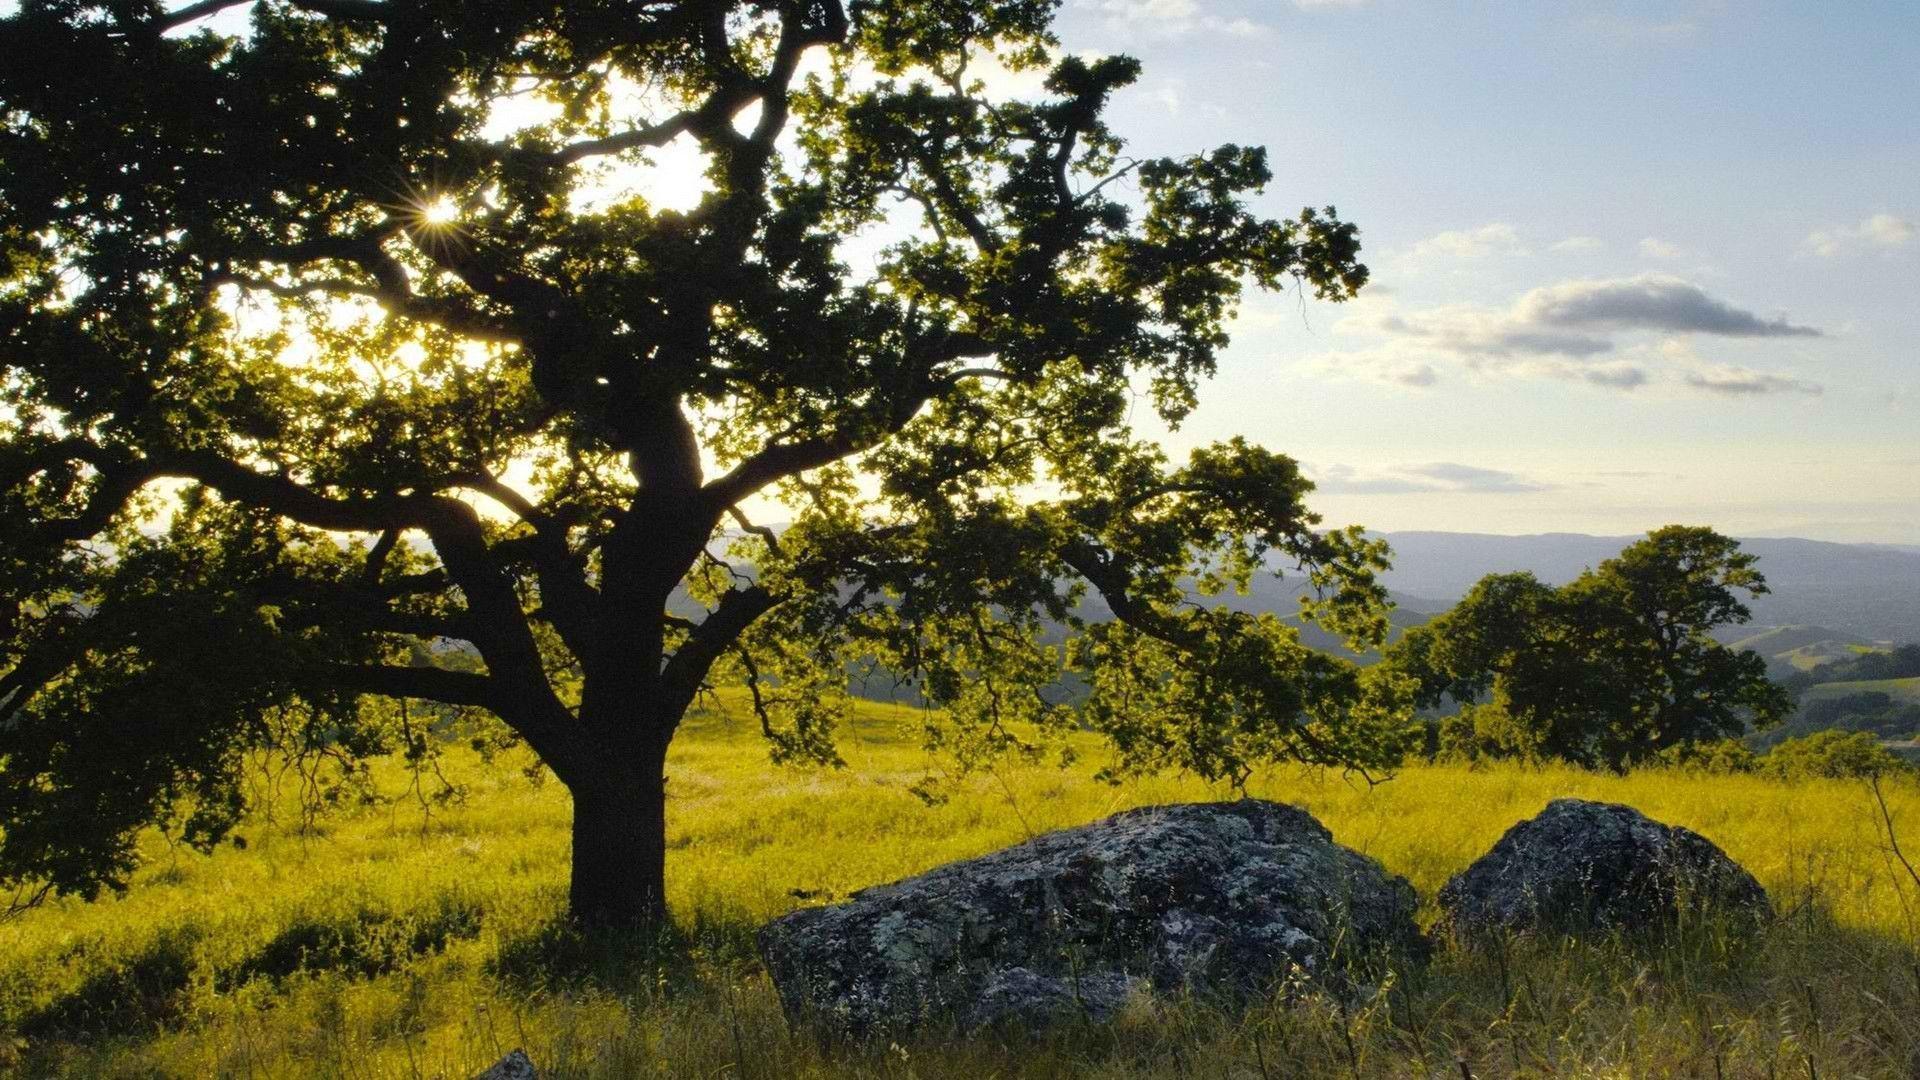 The Image of World Hills California Parks Mount Oak 1920x1080 HD